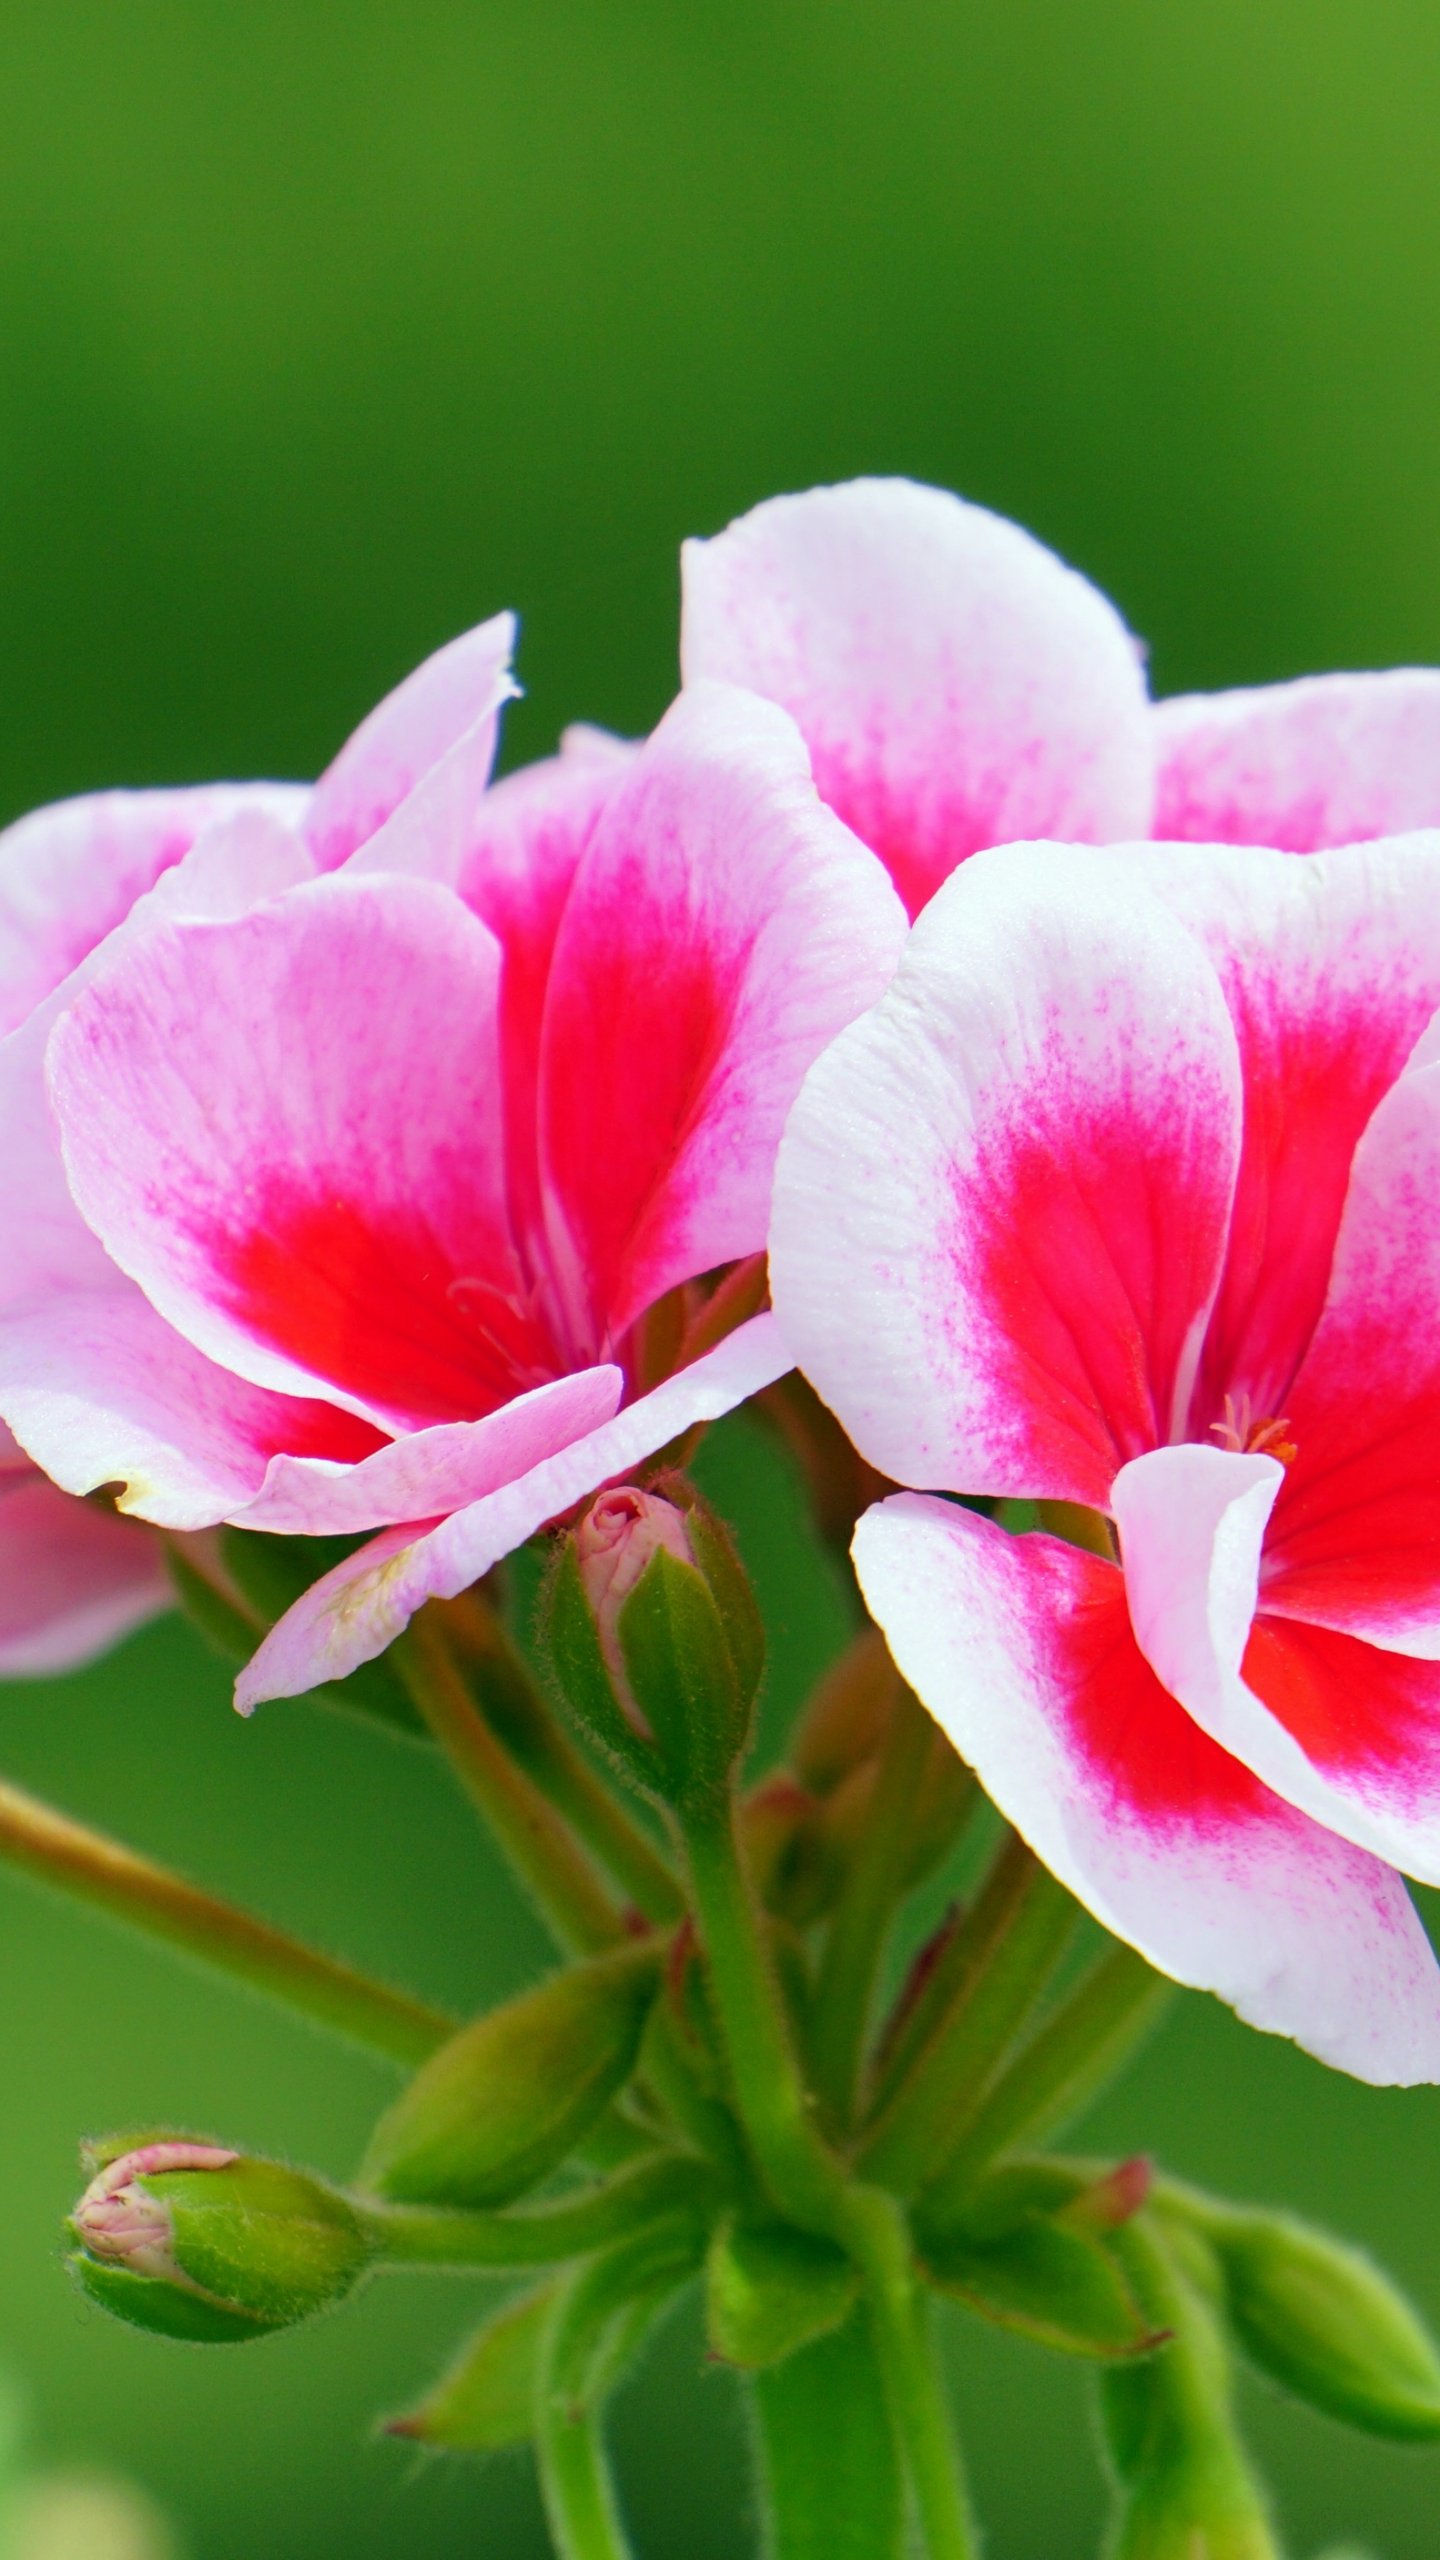 Pink Flowers Wallpaper - iPhone, Android & Desktop Backgrounds